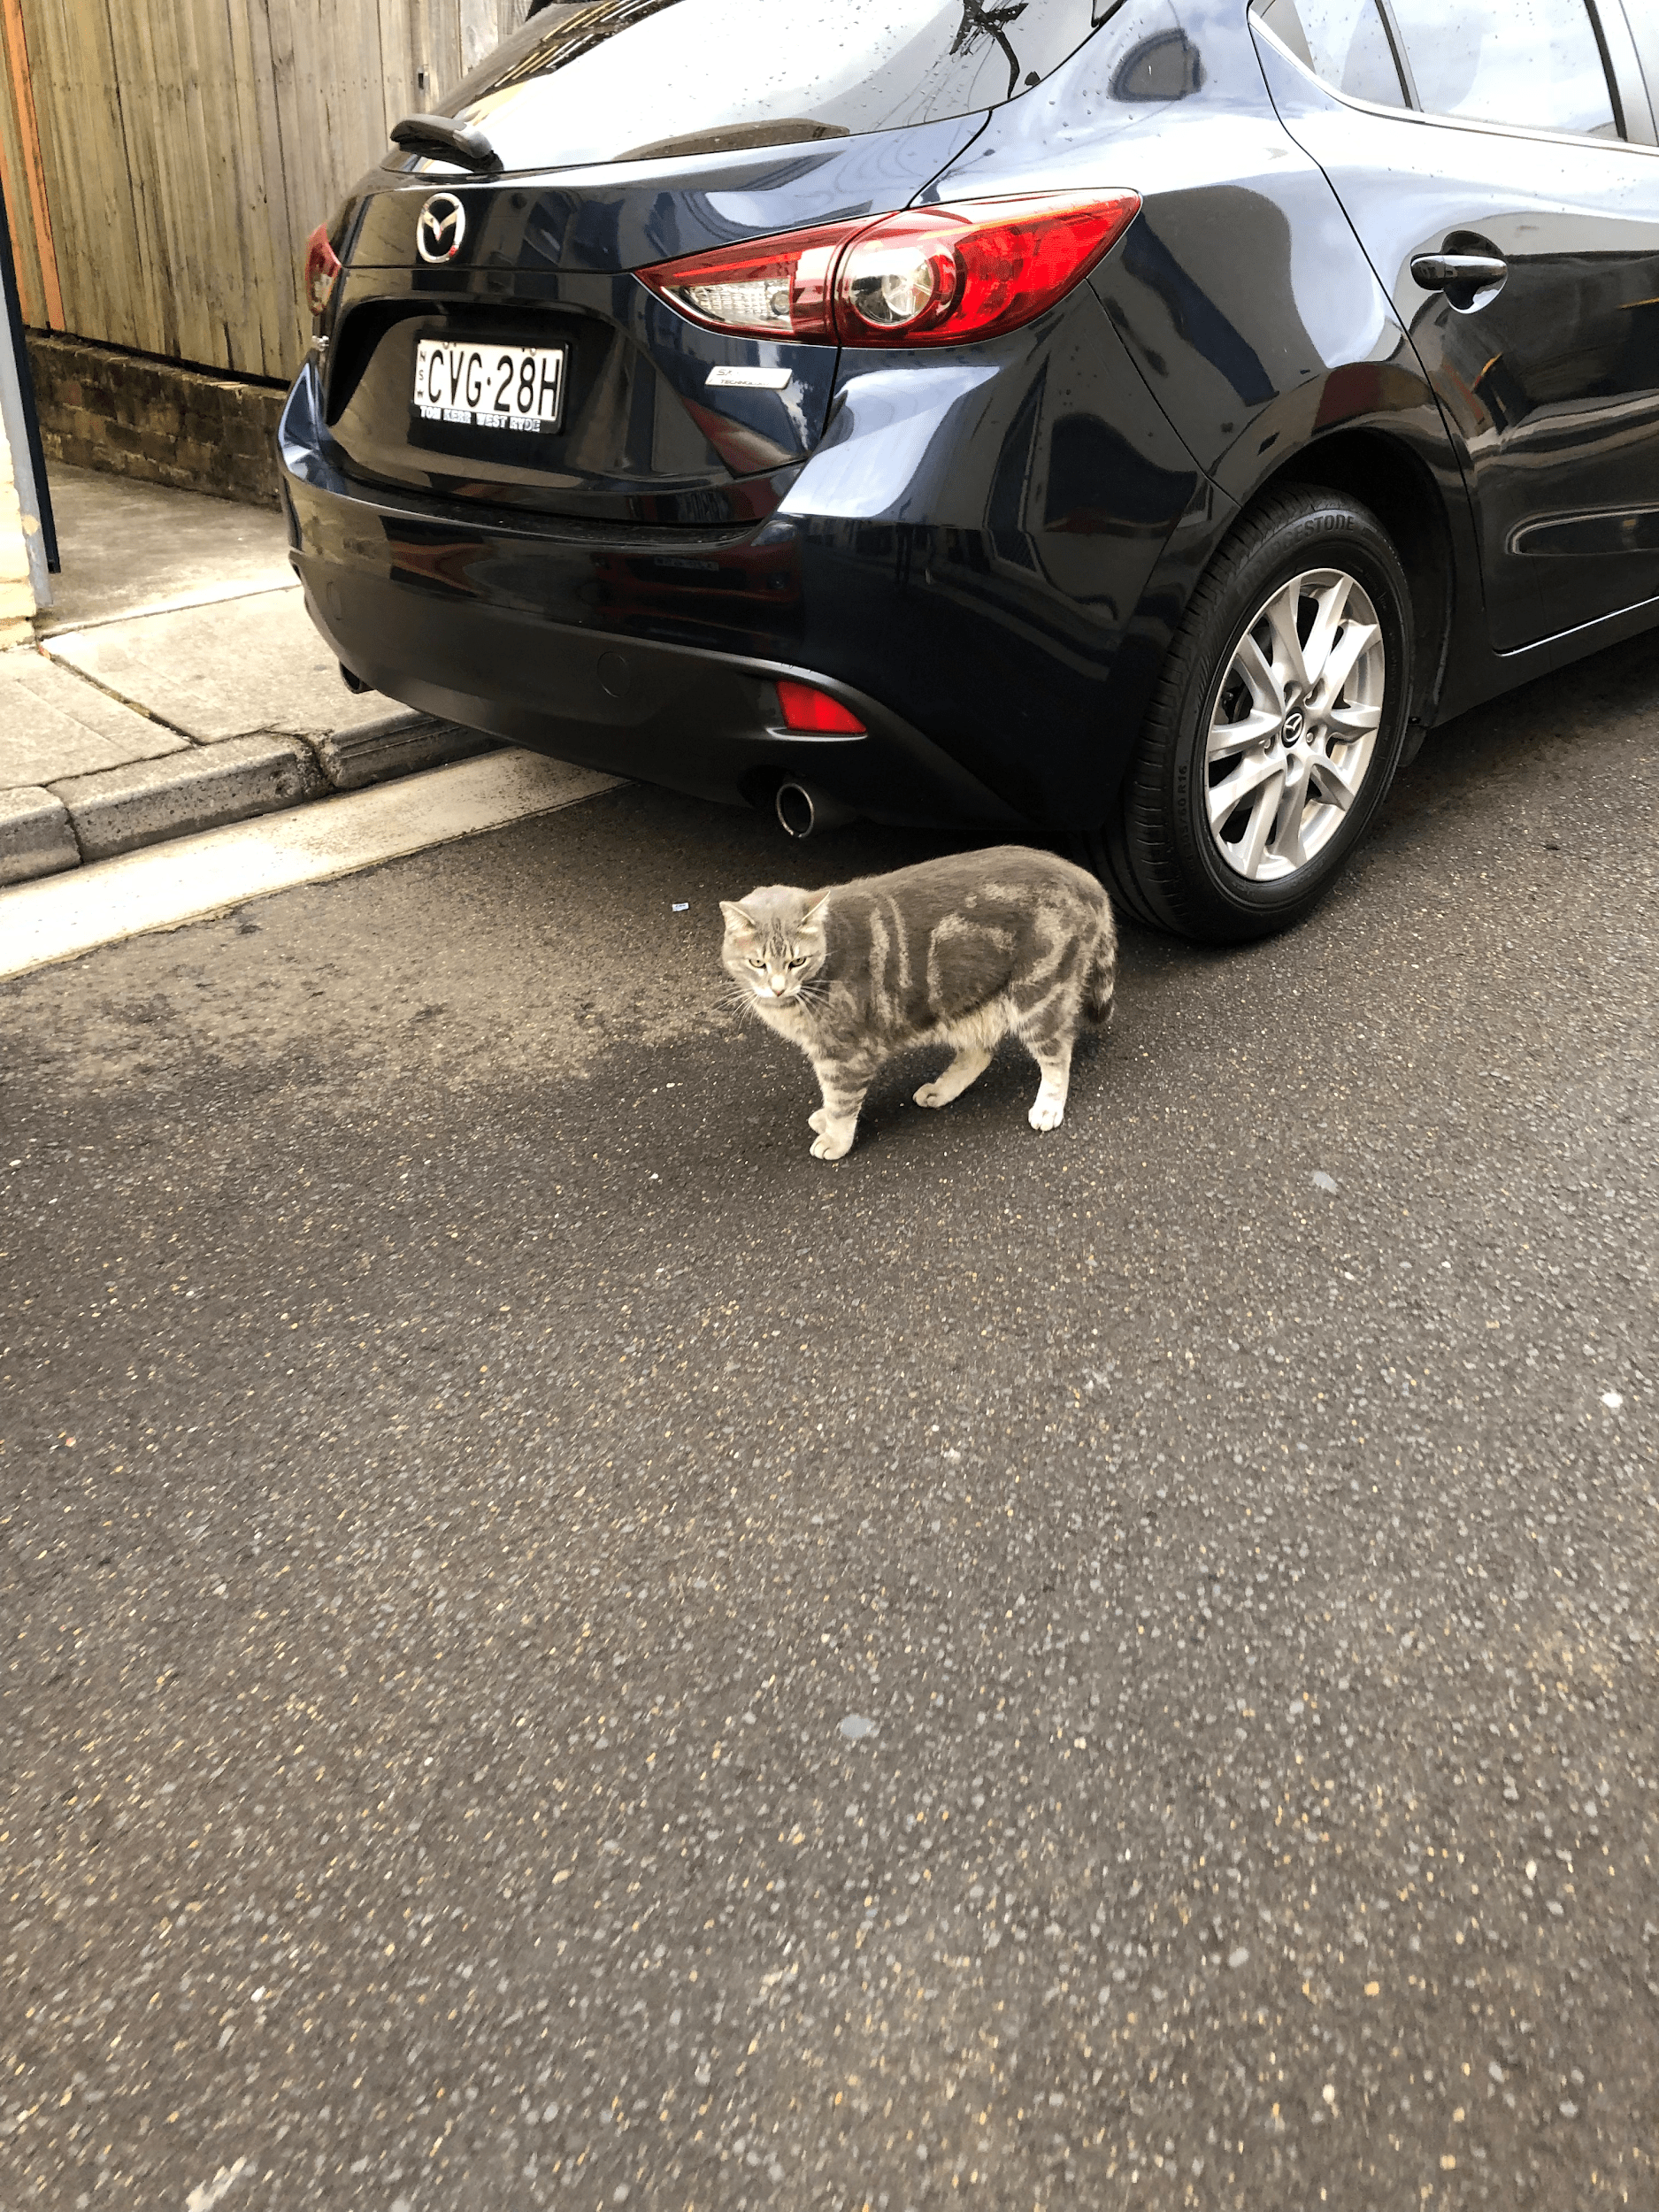 Cat standing next to tire of black car